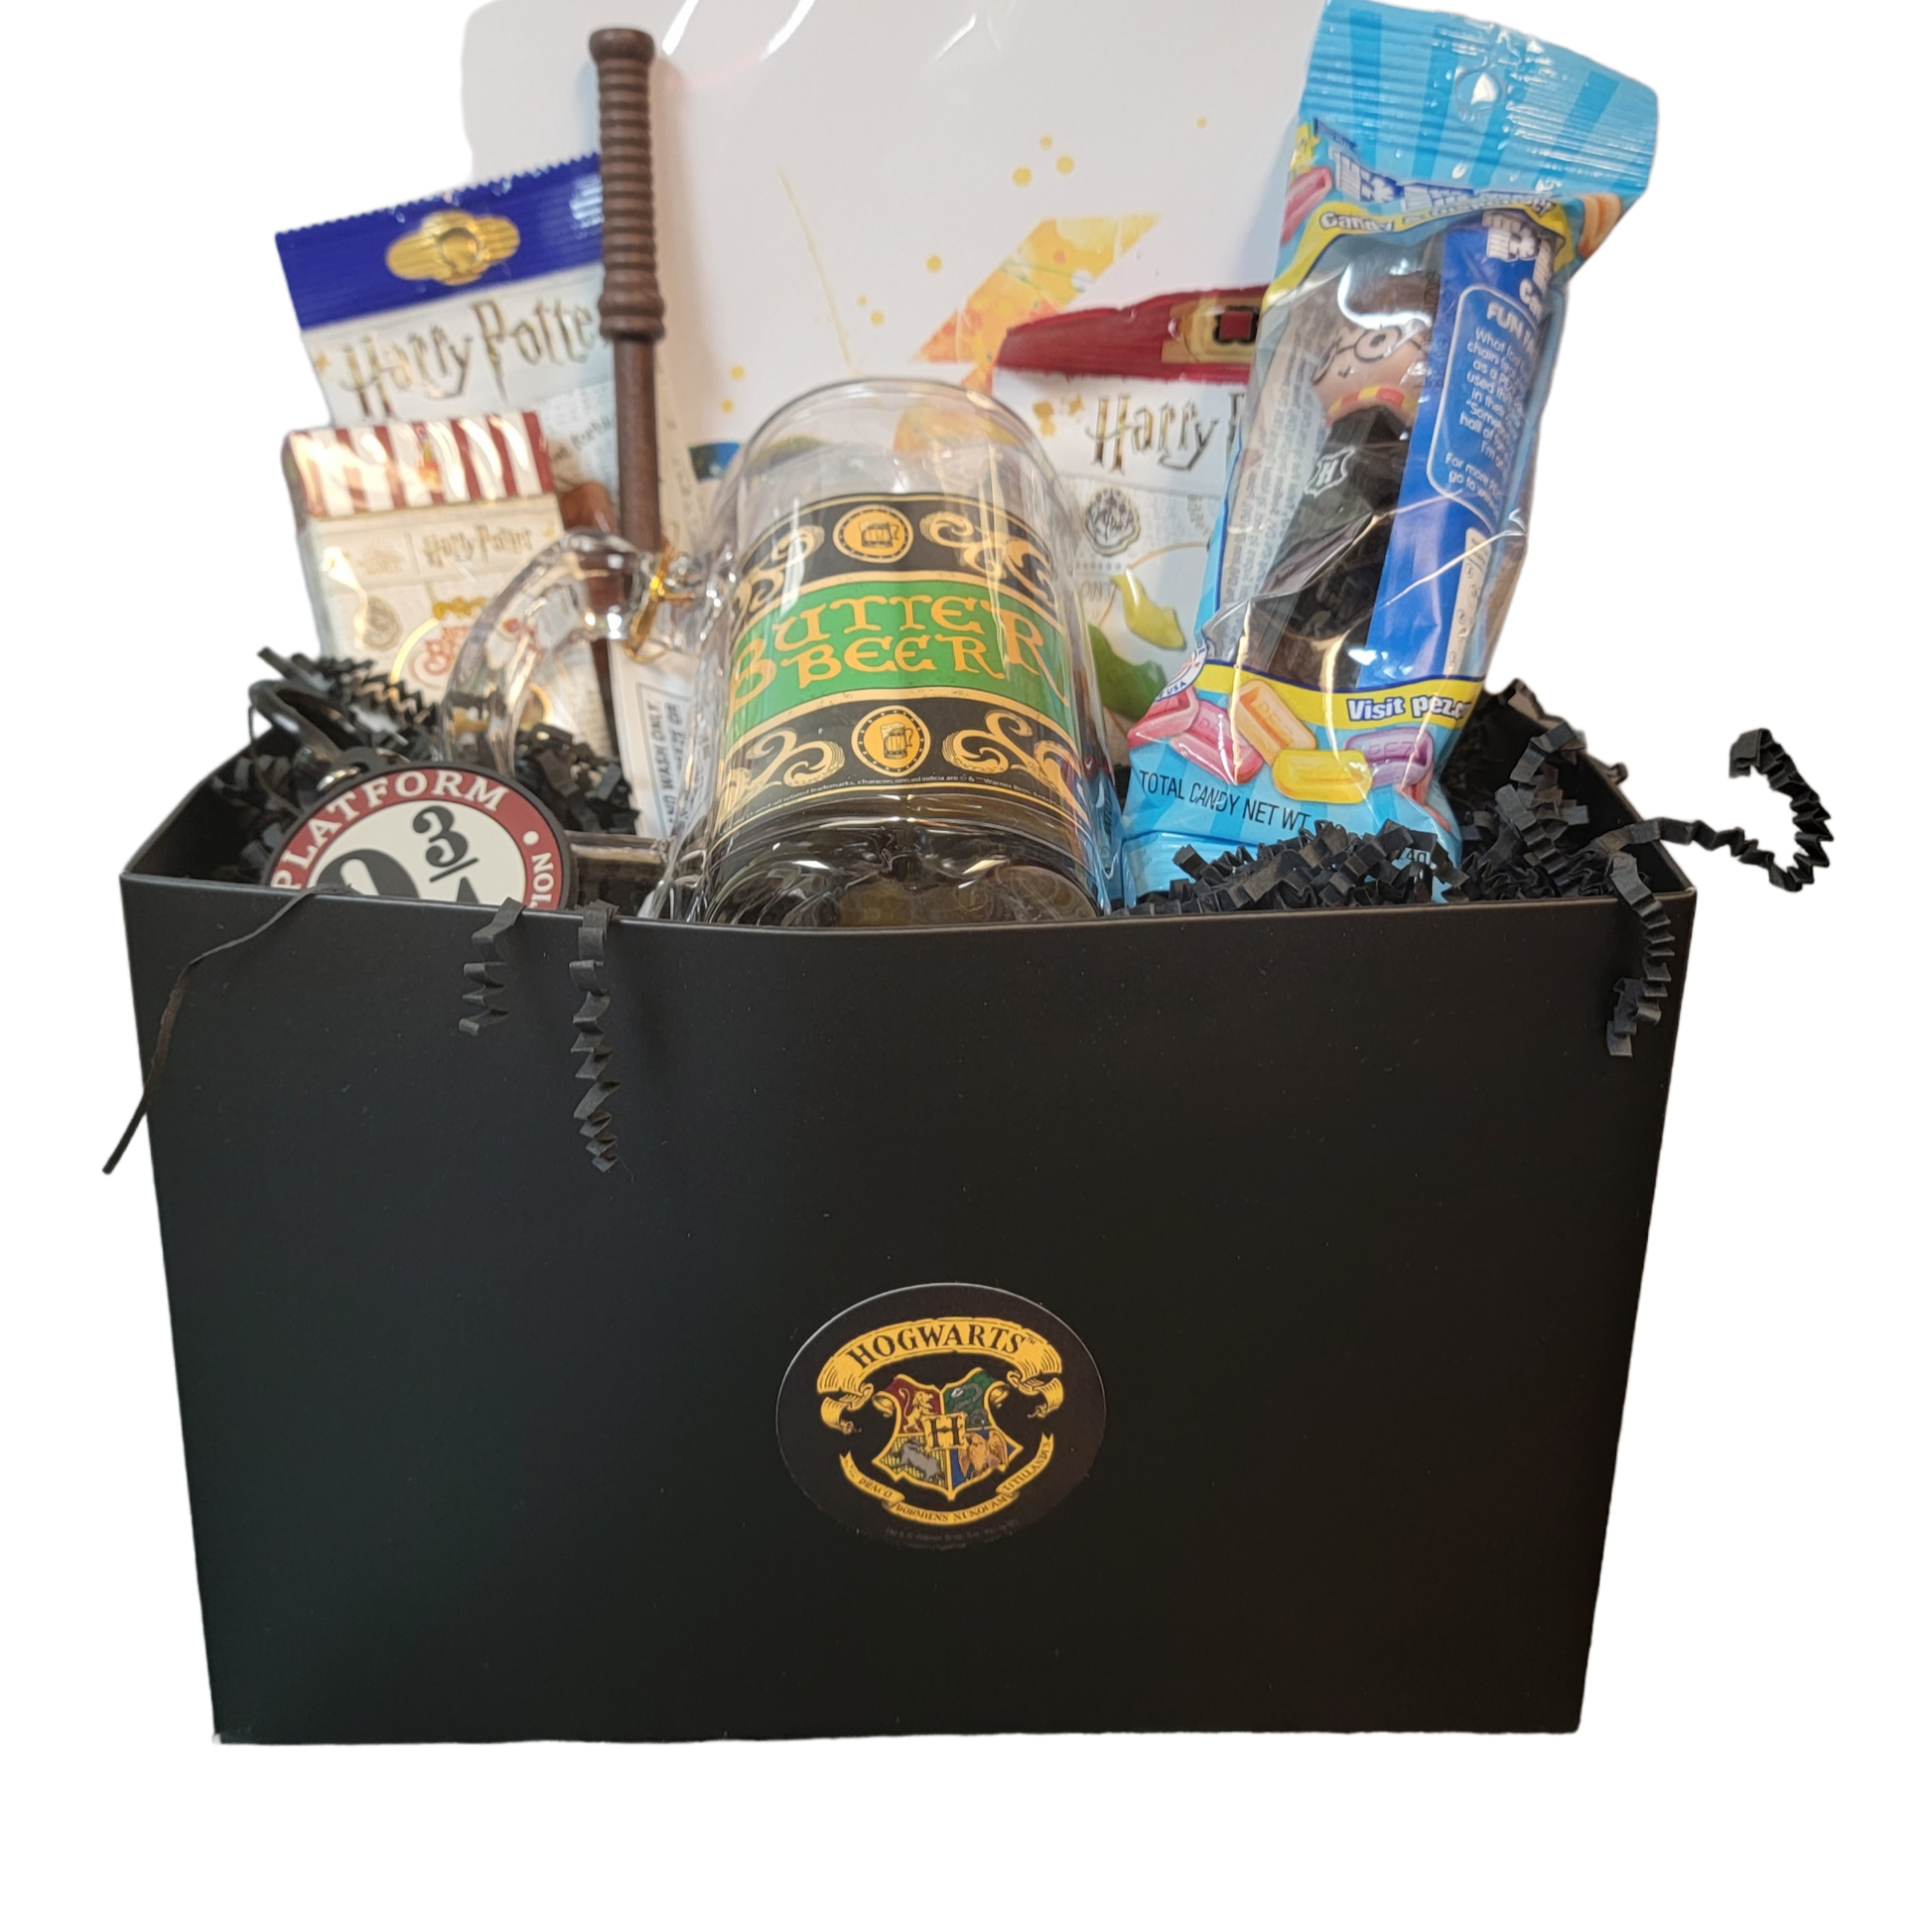 Scully Berg kleding op bibliotheek Harry Potter Gift Box | Mouse to Your House | Disney & Universal Themed  Gift Baskets